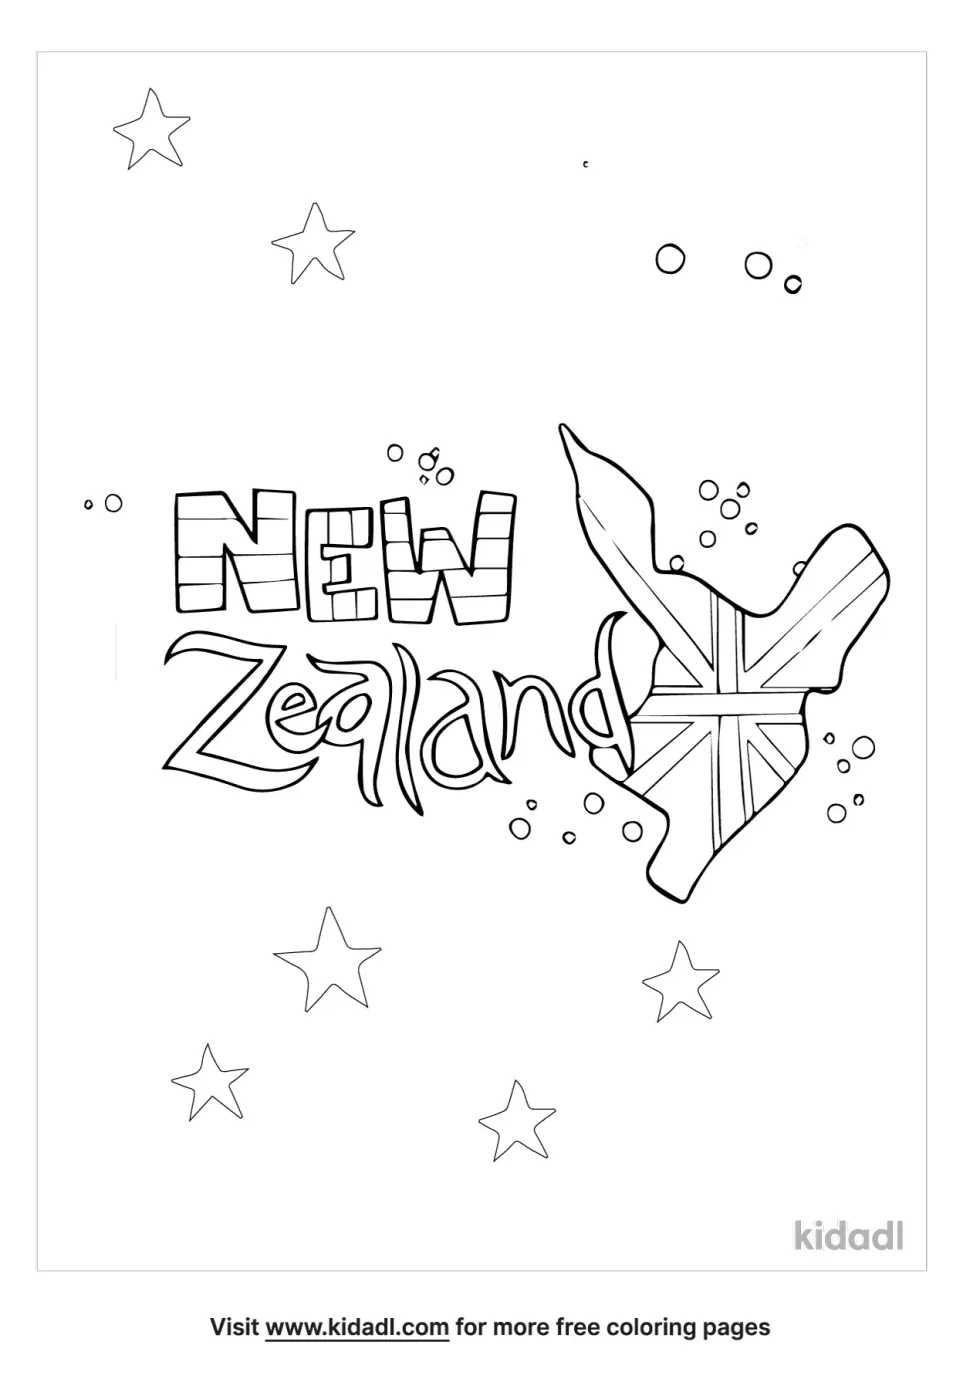 New Zealand Coloring Page